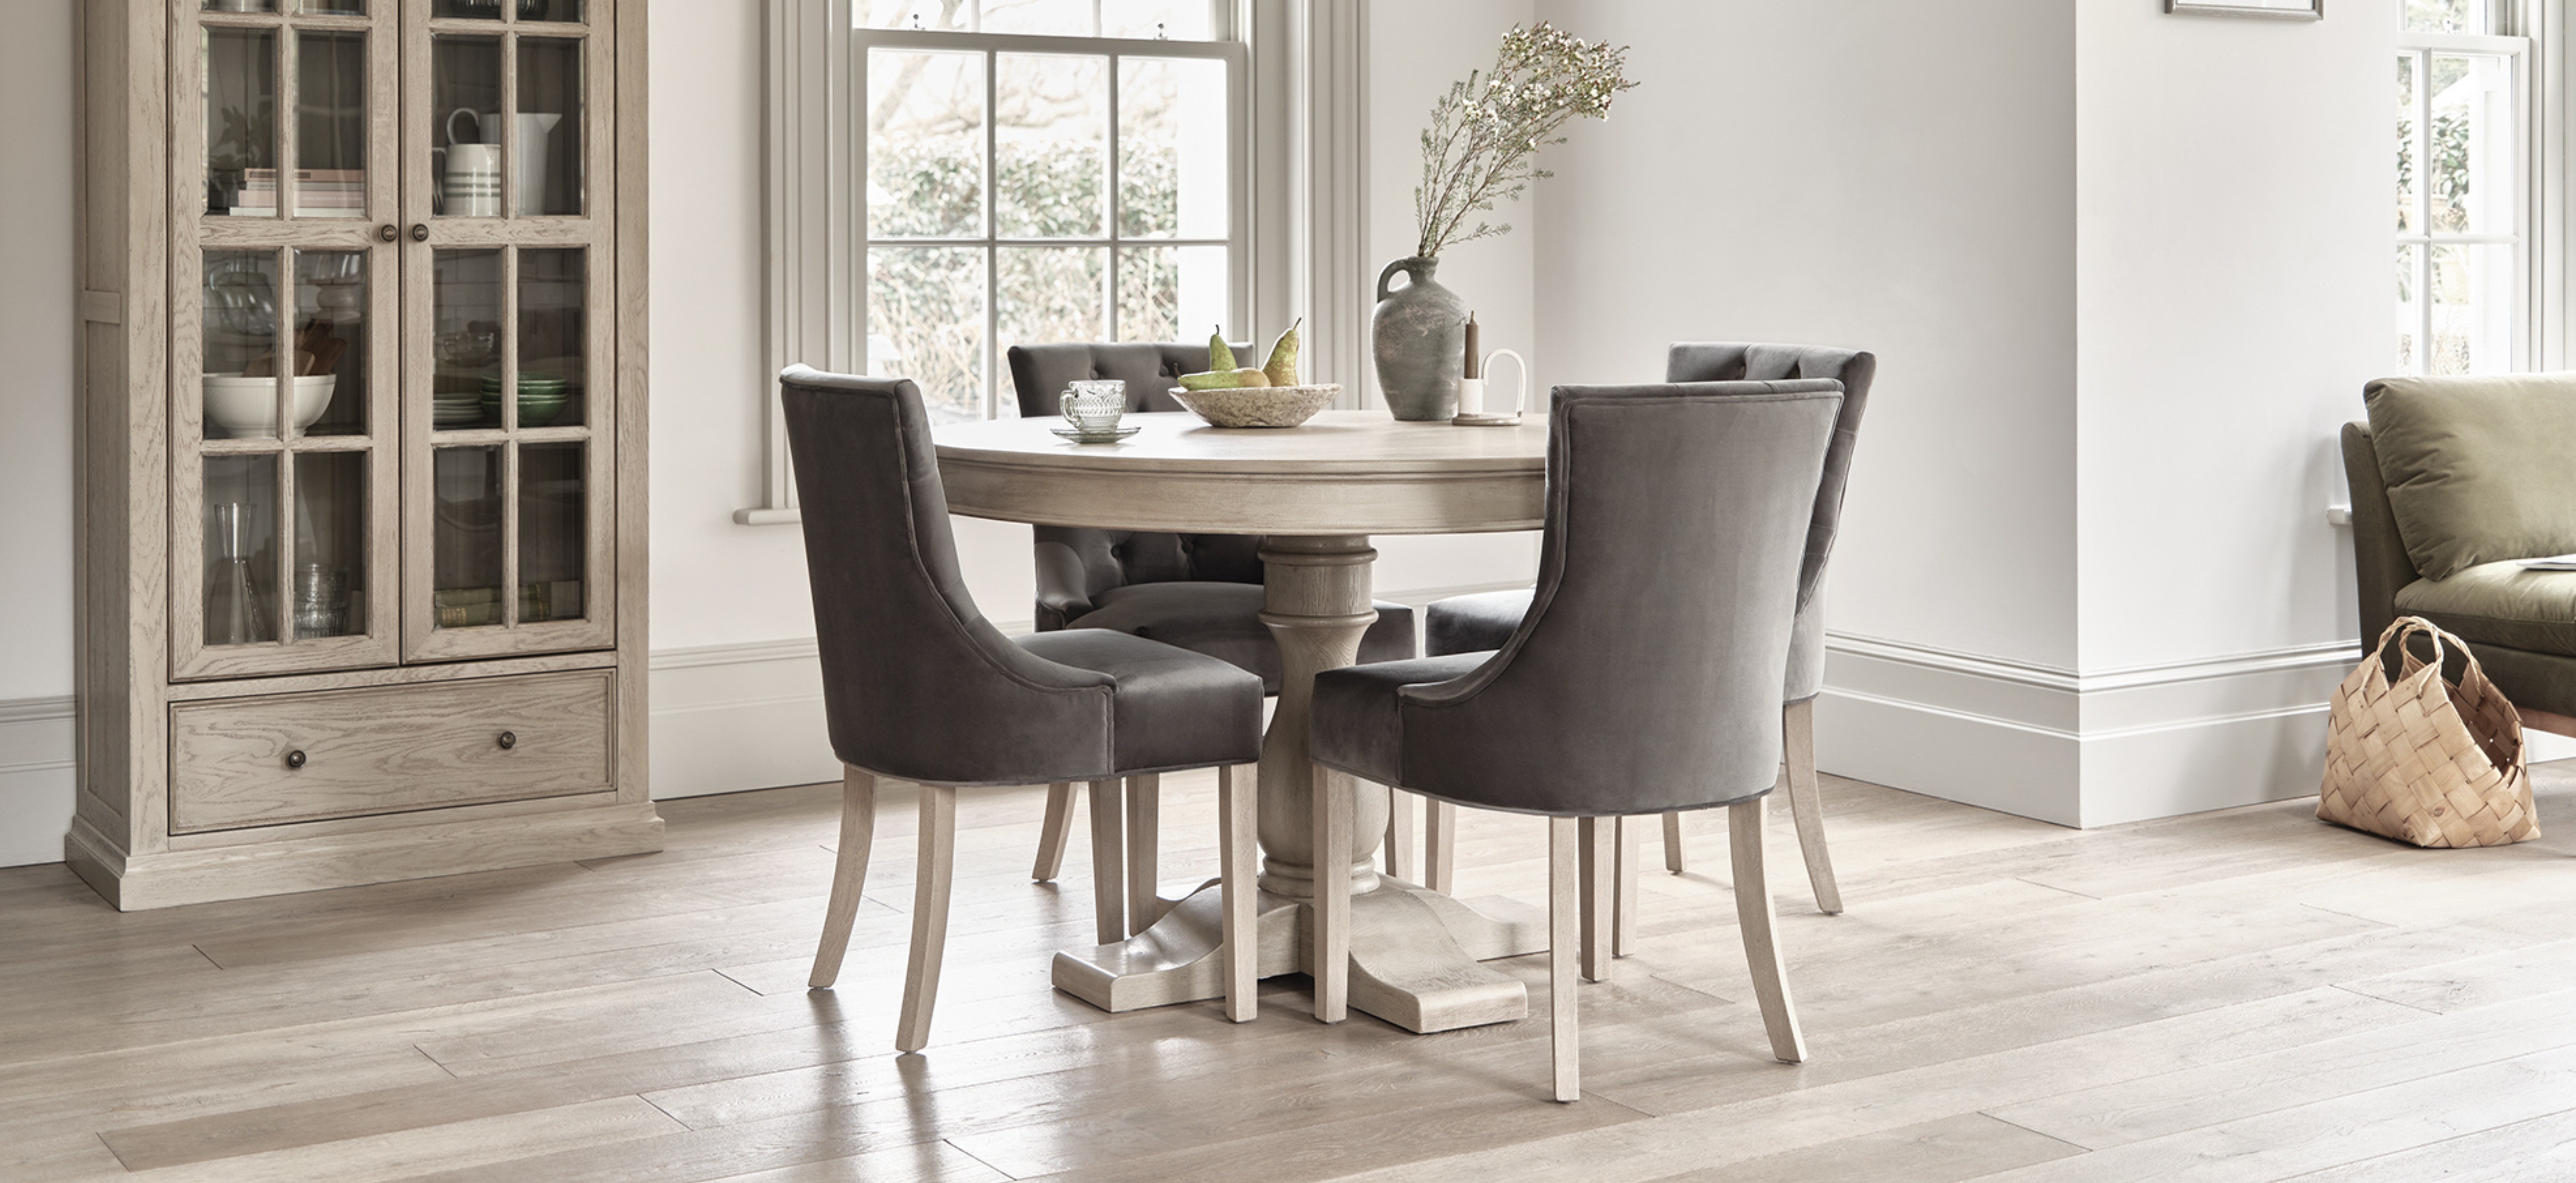 Oak furnitureland burleigh round table with isobel dining chairs